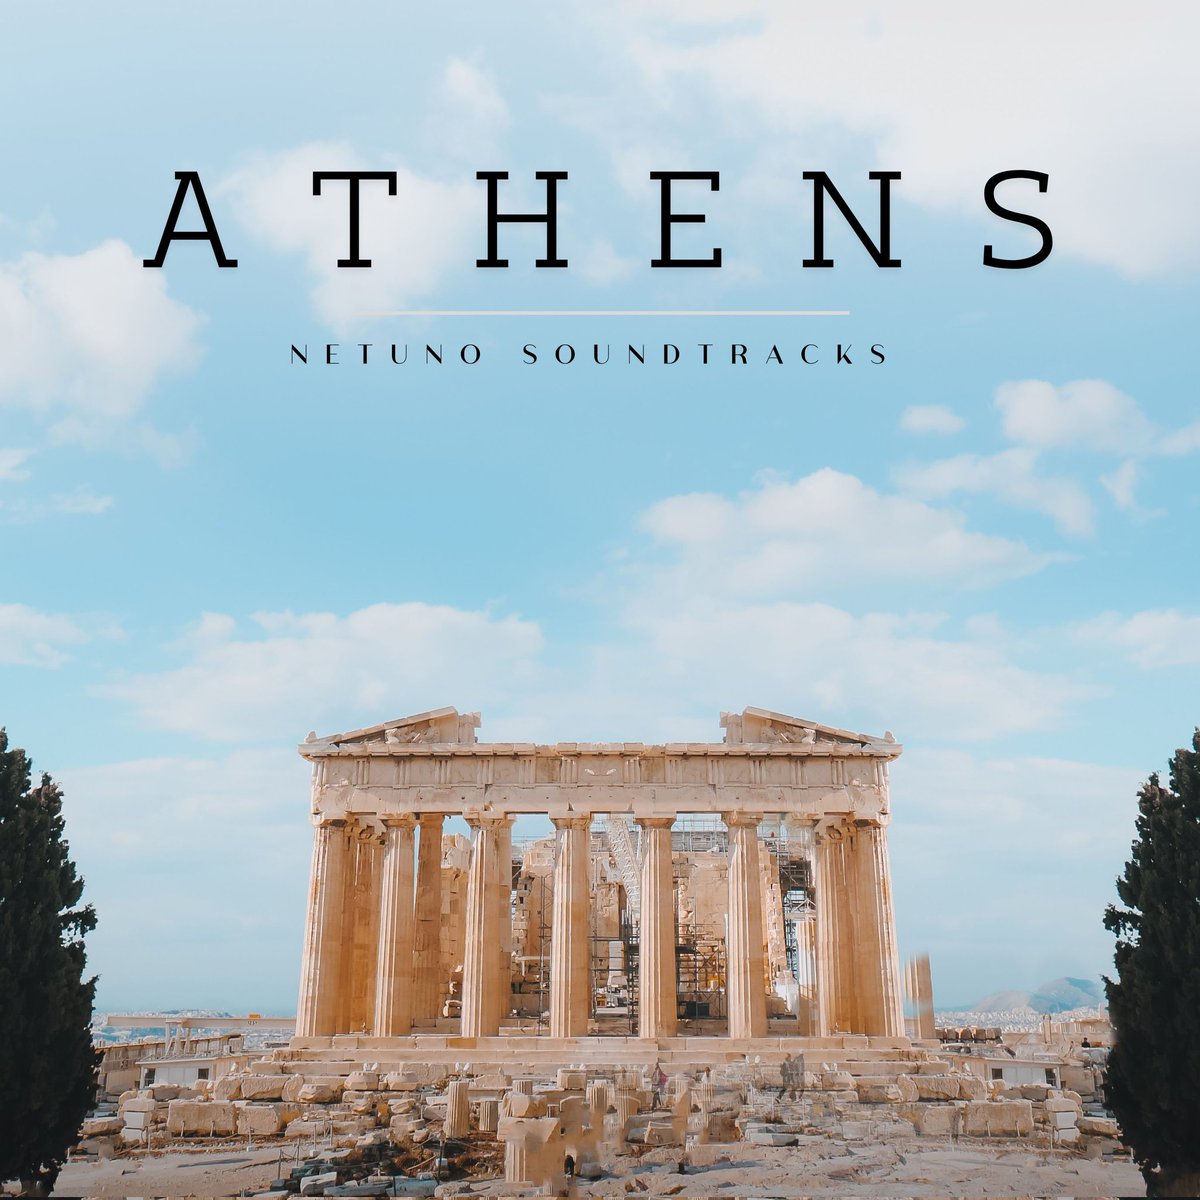 🏛️ Introducing 'Athens' - immerse yourself in the ancient melodies of Greece

Streaming/download/licensing:
bio.link/netuno

#Athens #AncientGreekMusic #Kithara #Instrumental #MusicRelease #AncientMelodies #GreekCulture #HistoricalSounds #MusicForVideos #Soundtrack